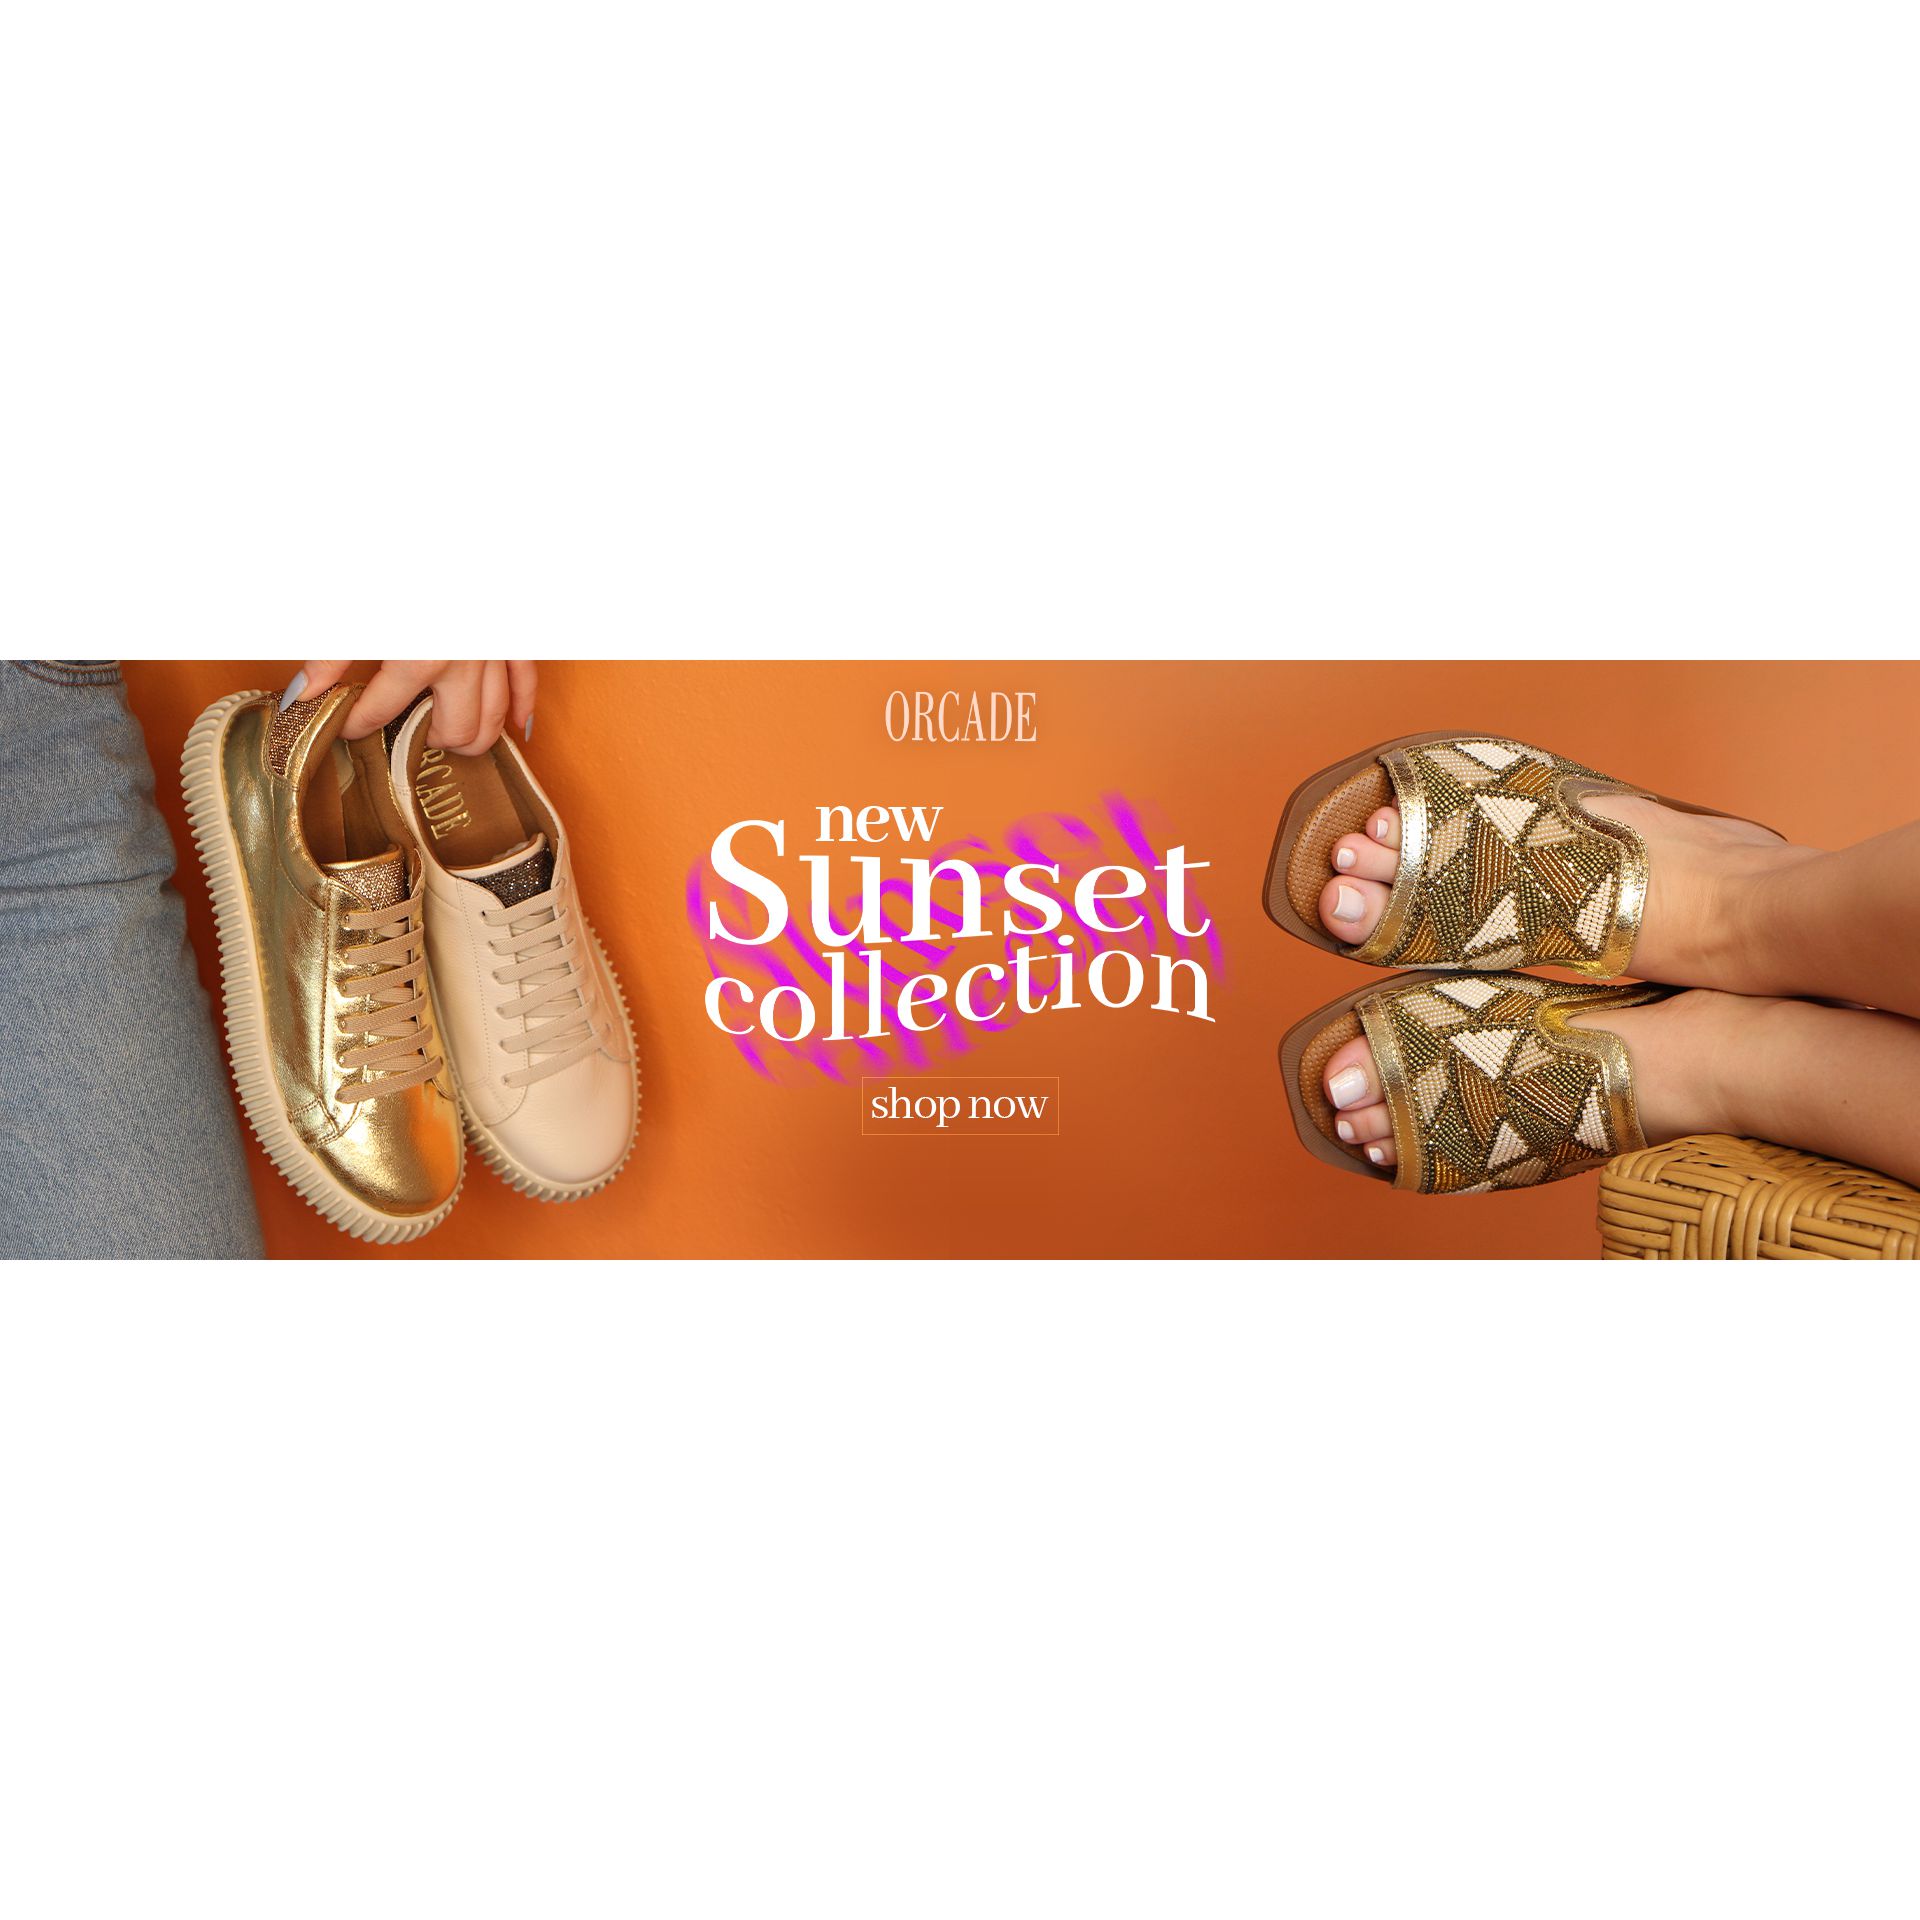 NEW SUNSET COLLECTION